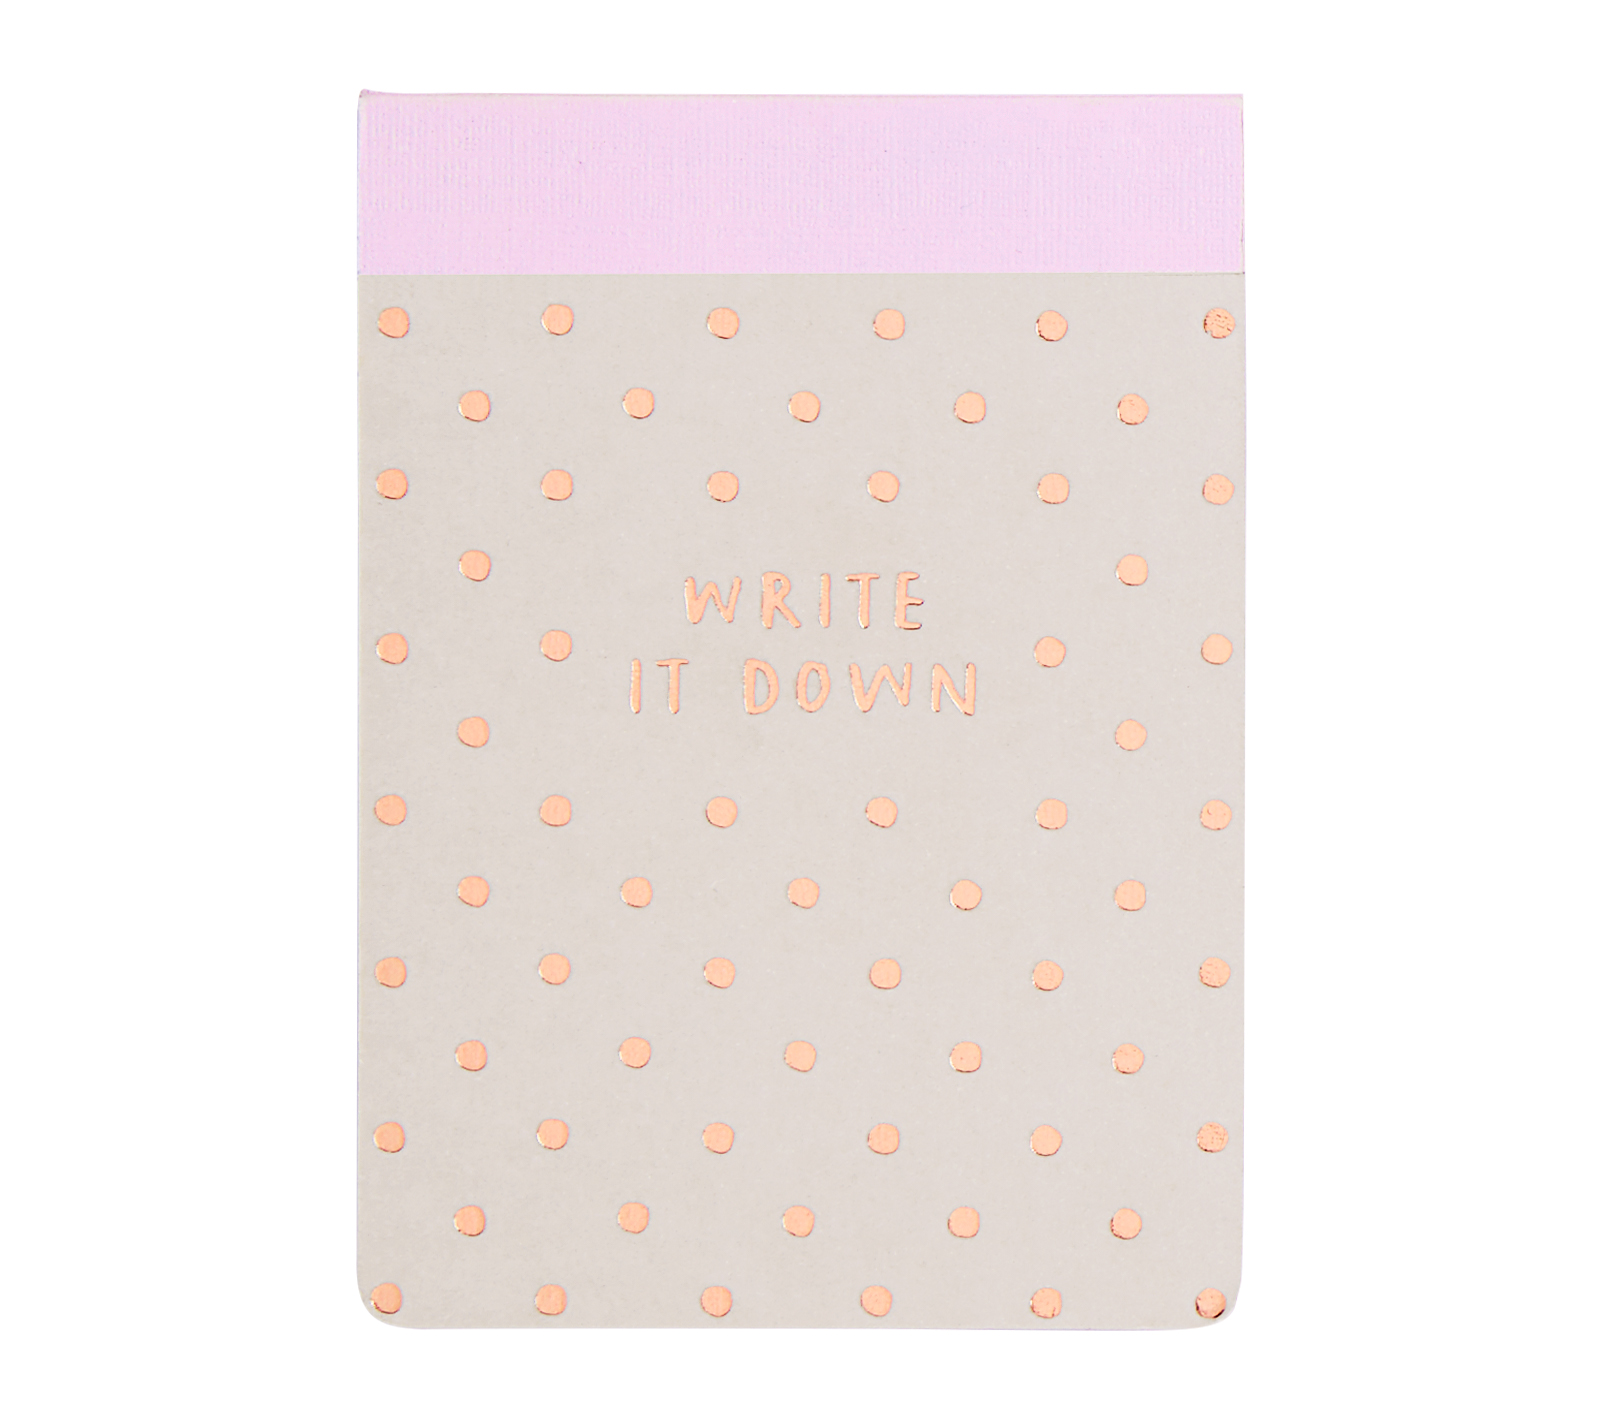 a7_printed_notepad_lovely_front.jpg